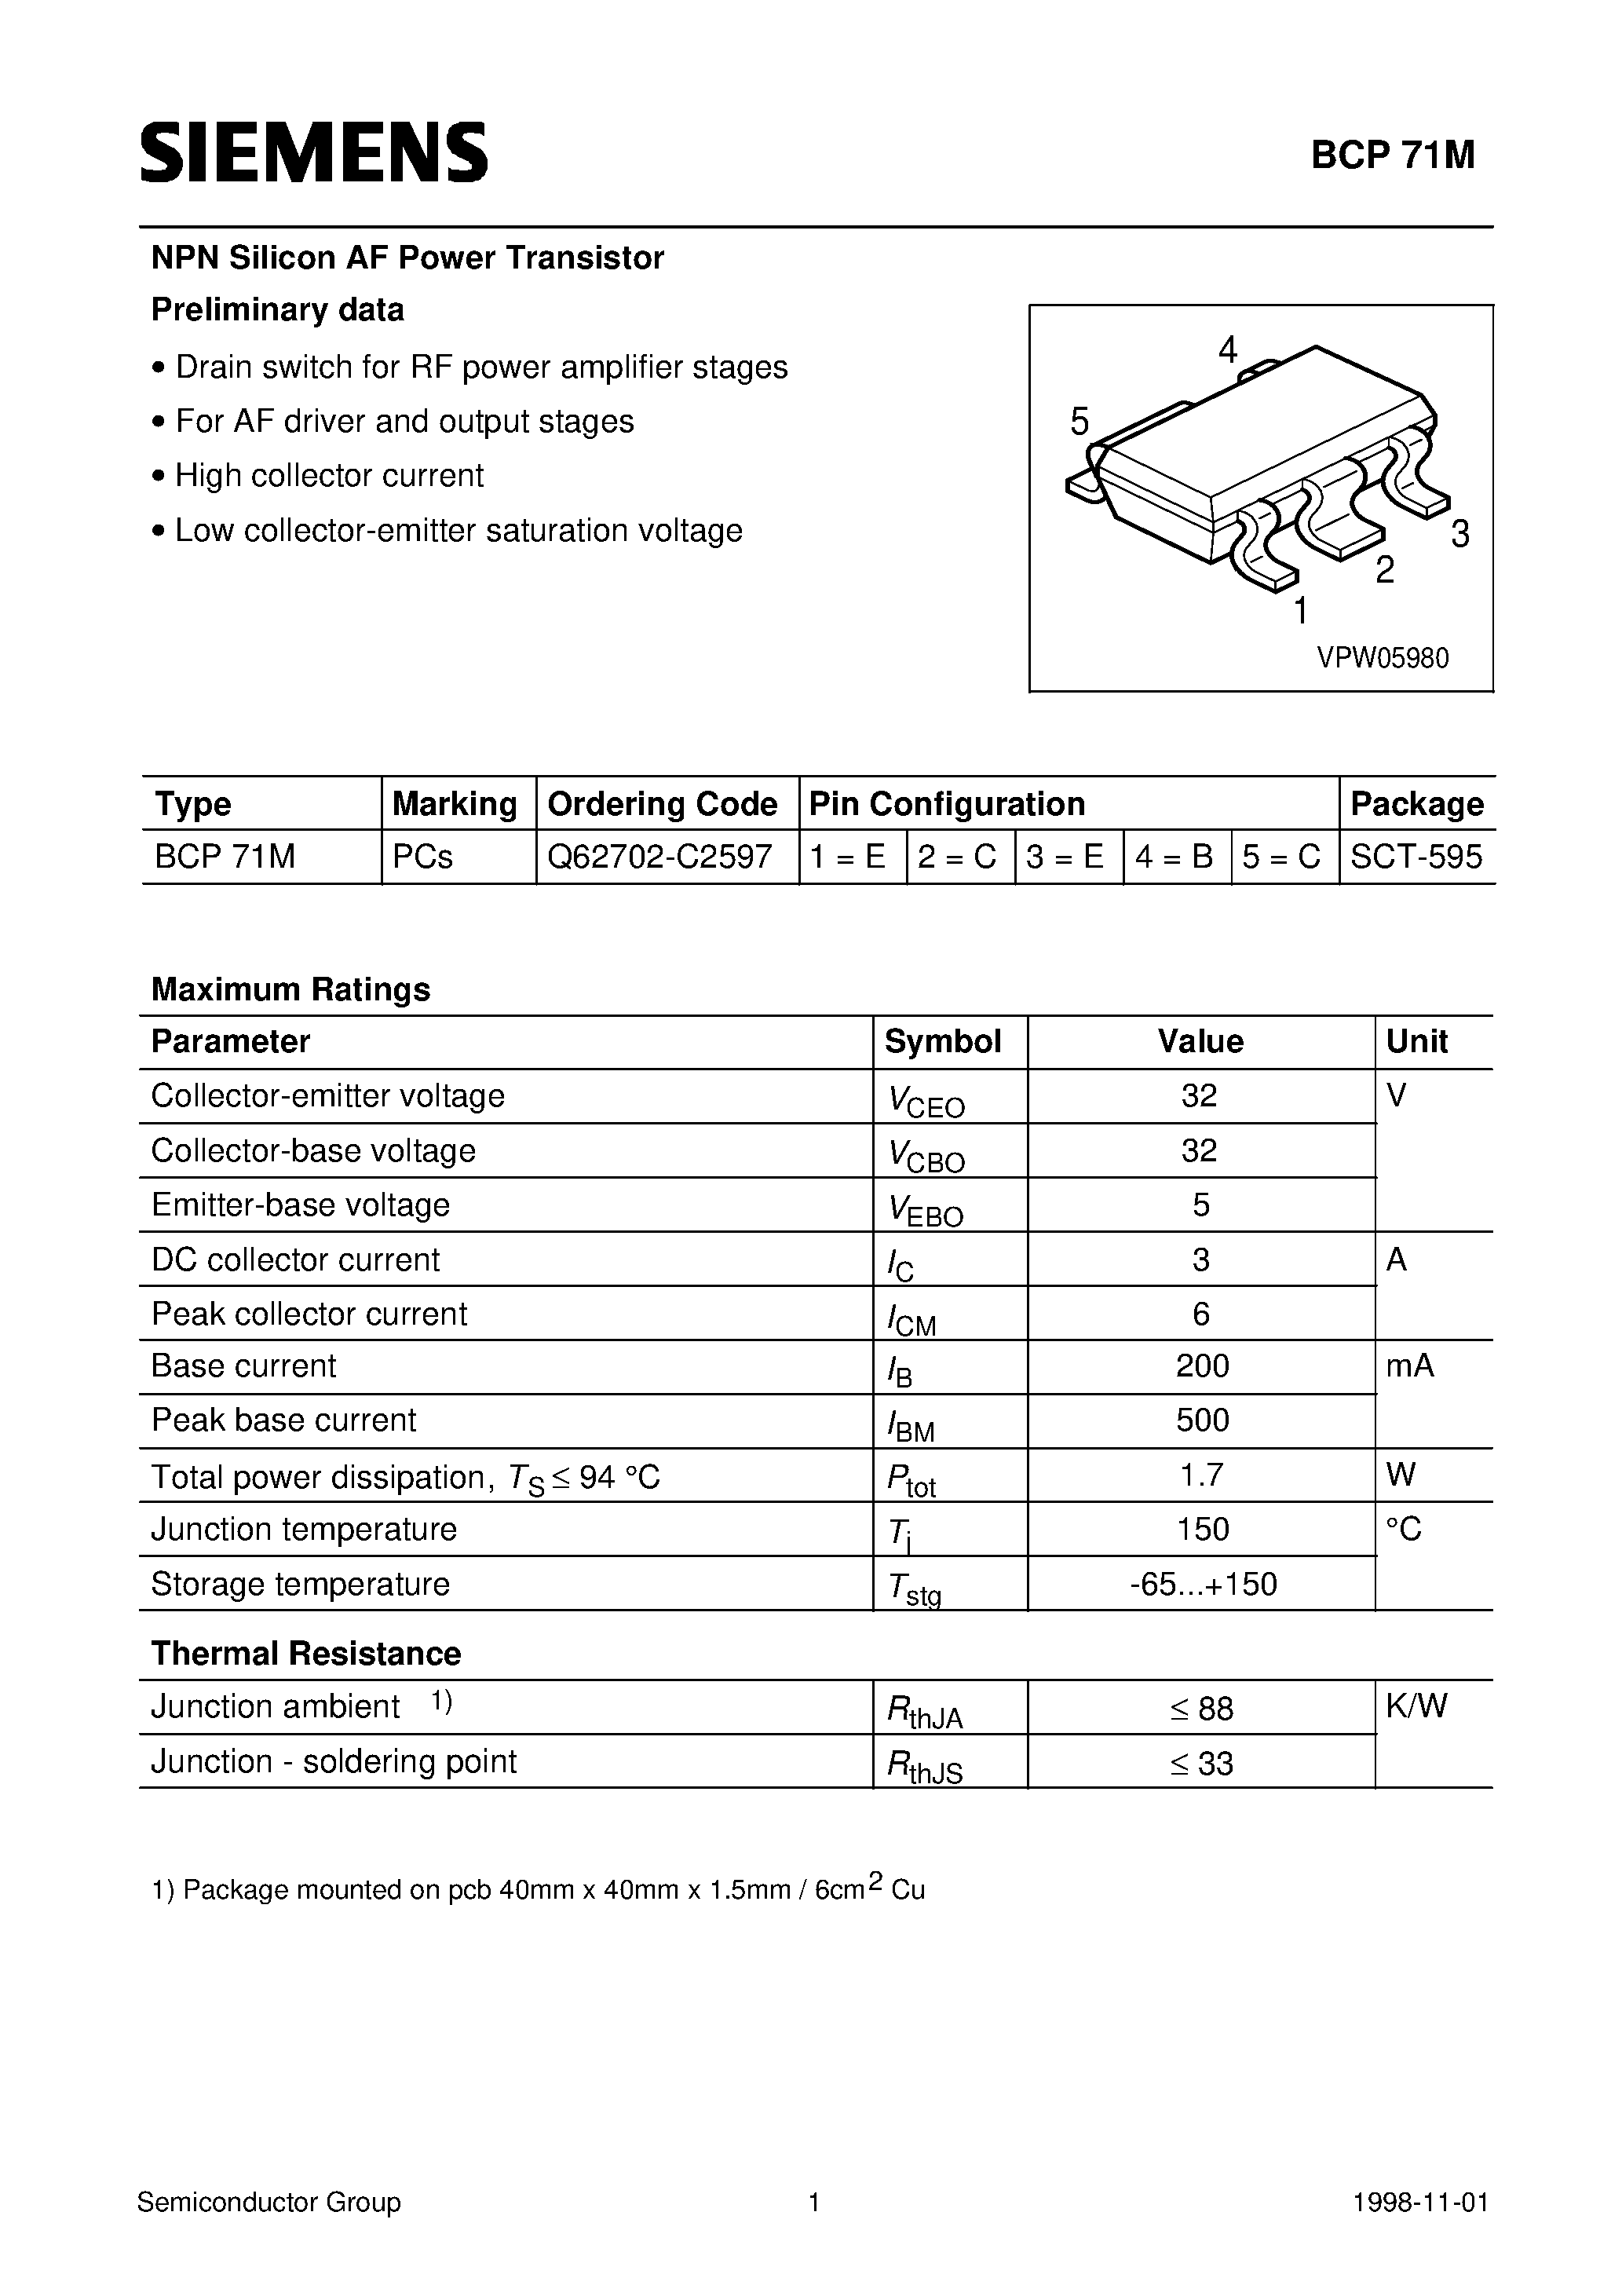 Datasheet BCP71 - NPN Silicon AF Power Transistor (Drain switch for RF power amplifier stages For AF driver and output stages High collector current) page 1